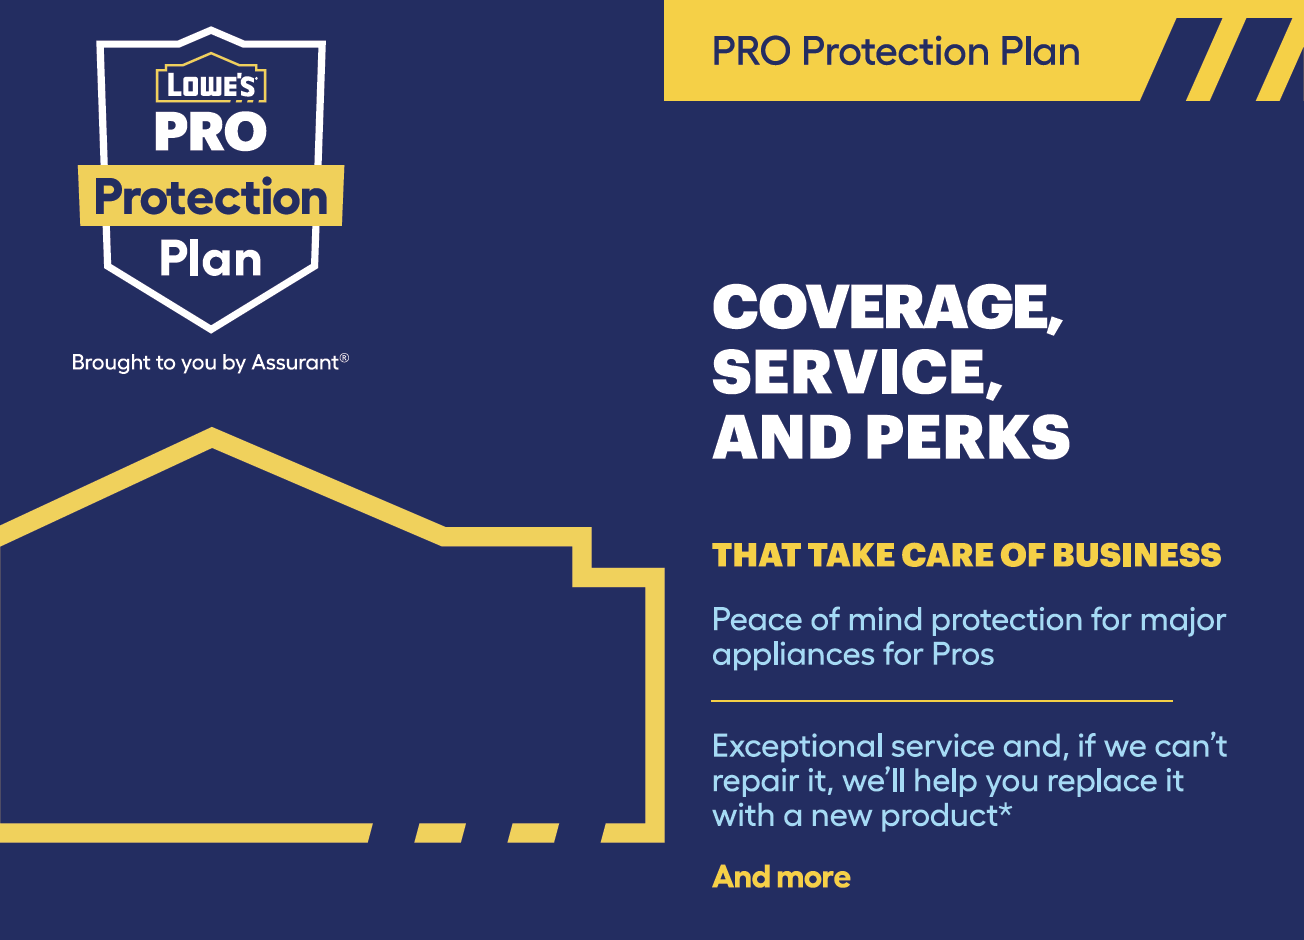 lowe-s-extended-protection-plans-offer-30-percent-plan-reimbursement-and-other-great-benefits